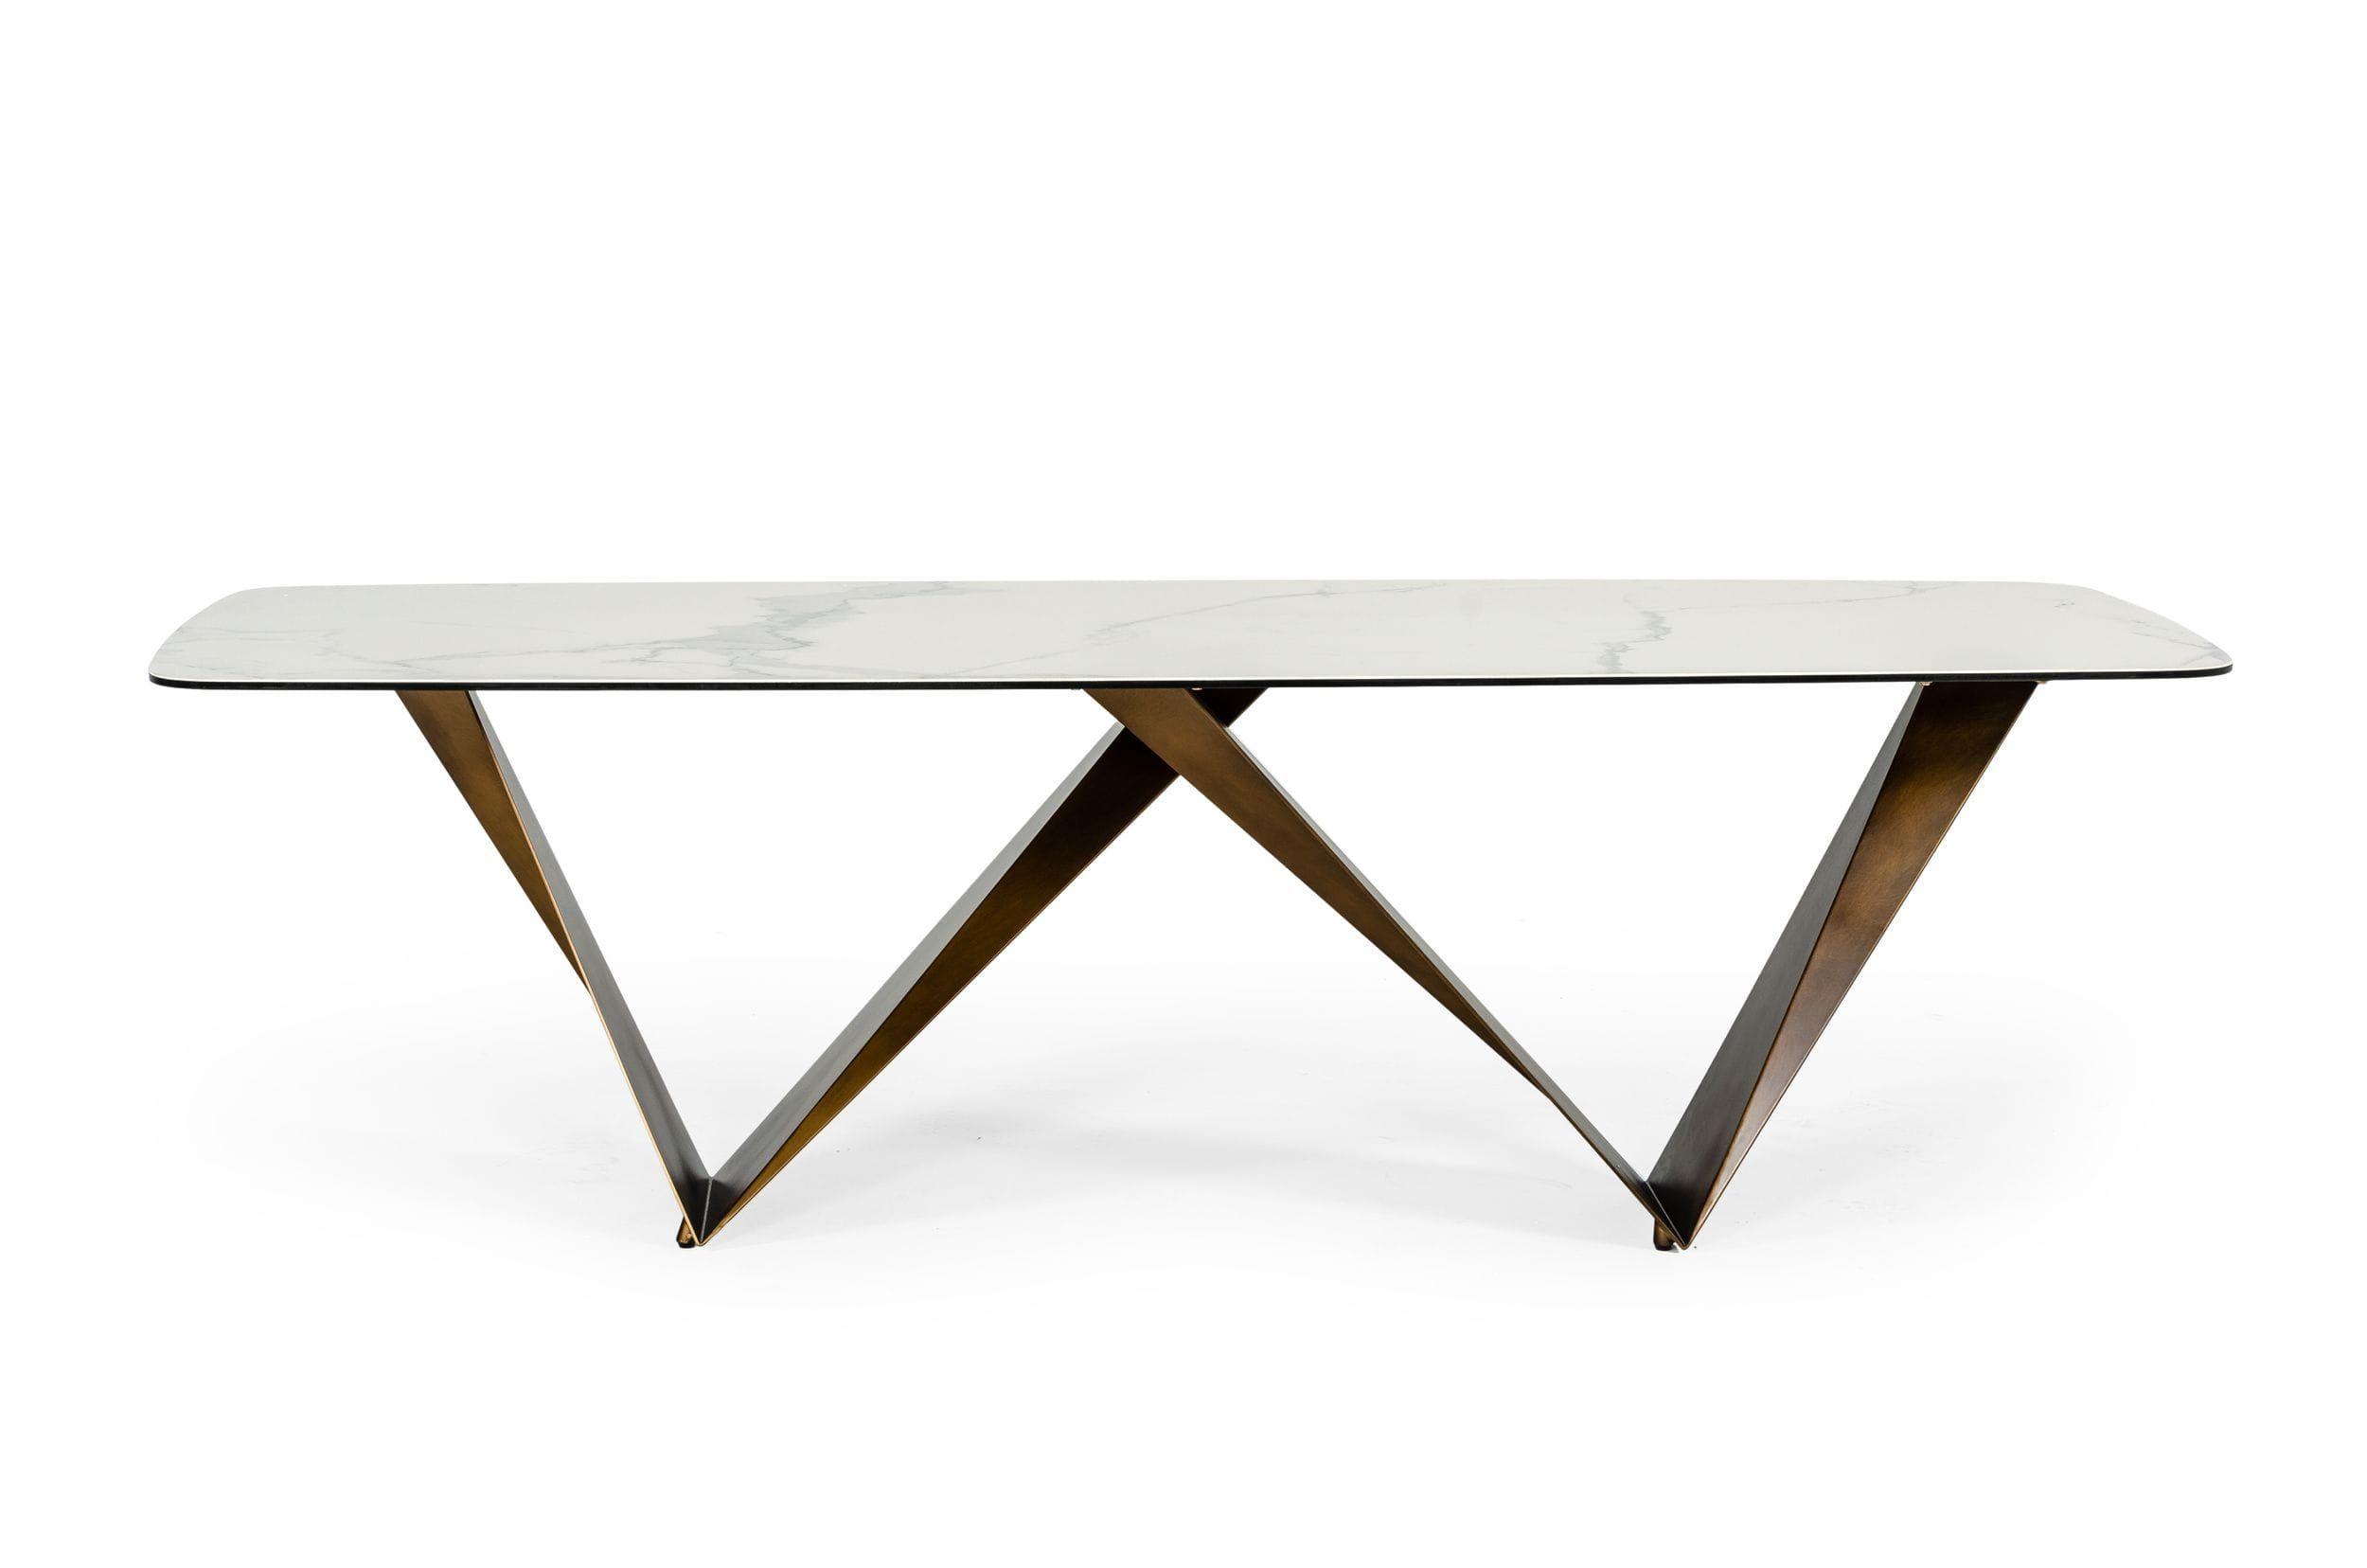 Contemporary, Modern Dining Table Melanie VGVCT1886-WHT-DT in White, Brown 